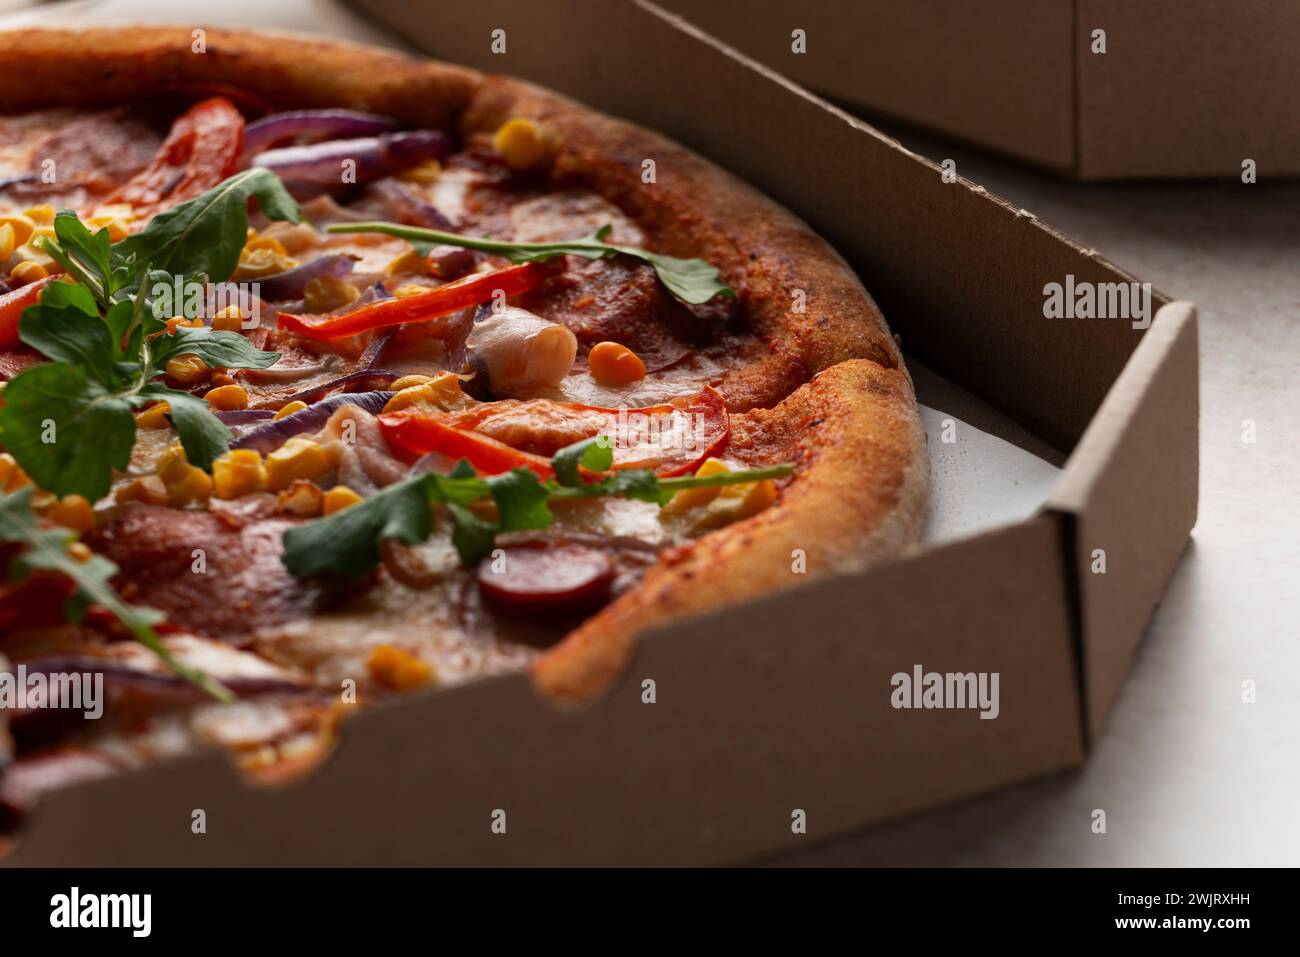 Large Pizza with sausages peppers and sweetcorn in open carton box on kitchen table extreme closeup view Stock Photo